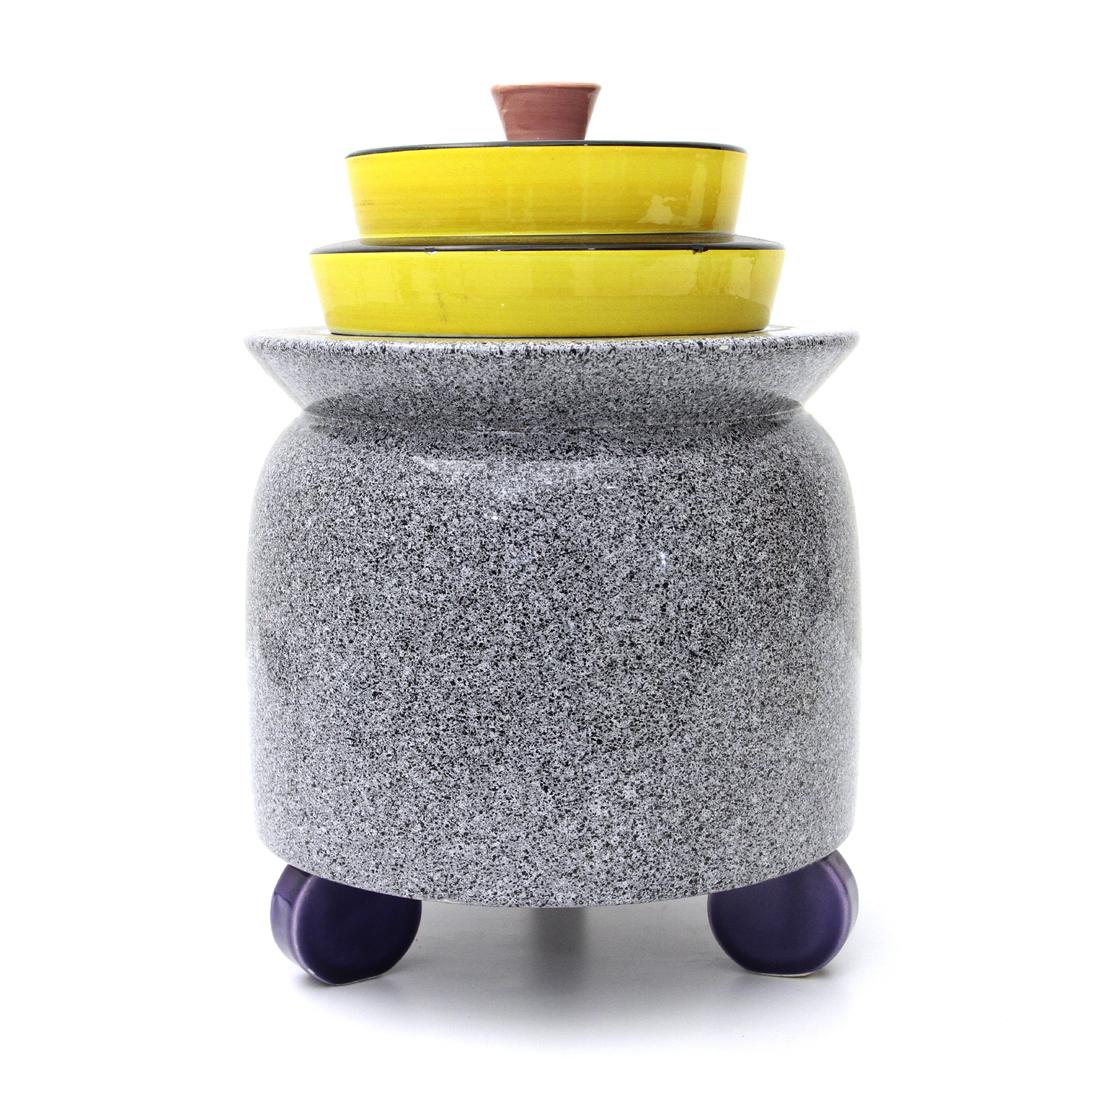 Ceramic object holder made by Baldelli in the 1980s.
Main body in grey color, resting on three purple colored feet.

Yellow and black cap with pink knob.
Good general conditions, one leg has been repaired.
Dimensions: Diameter 19 cm - Height 27